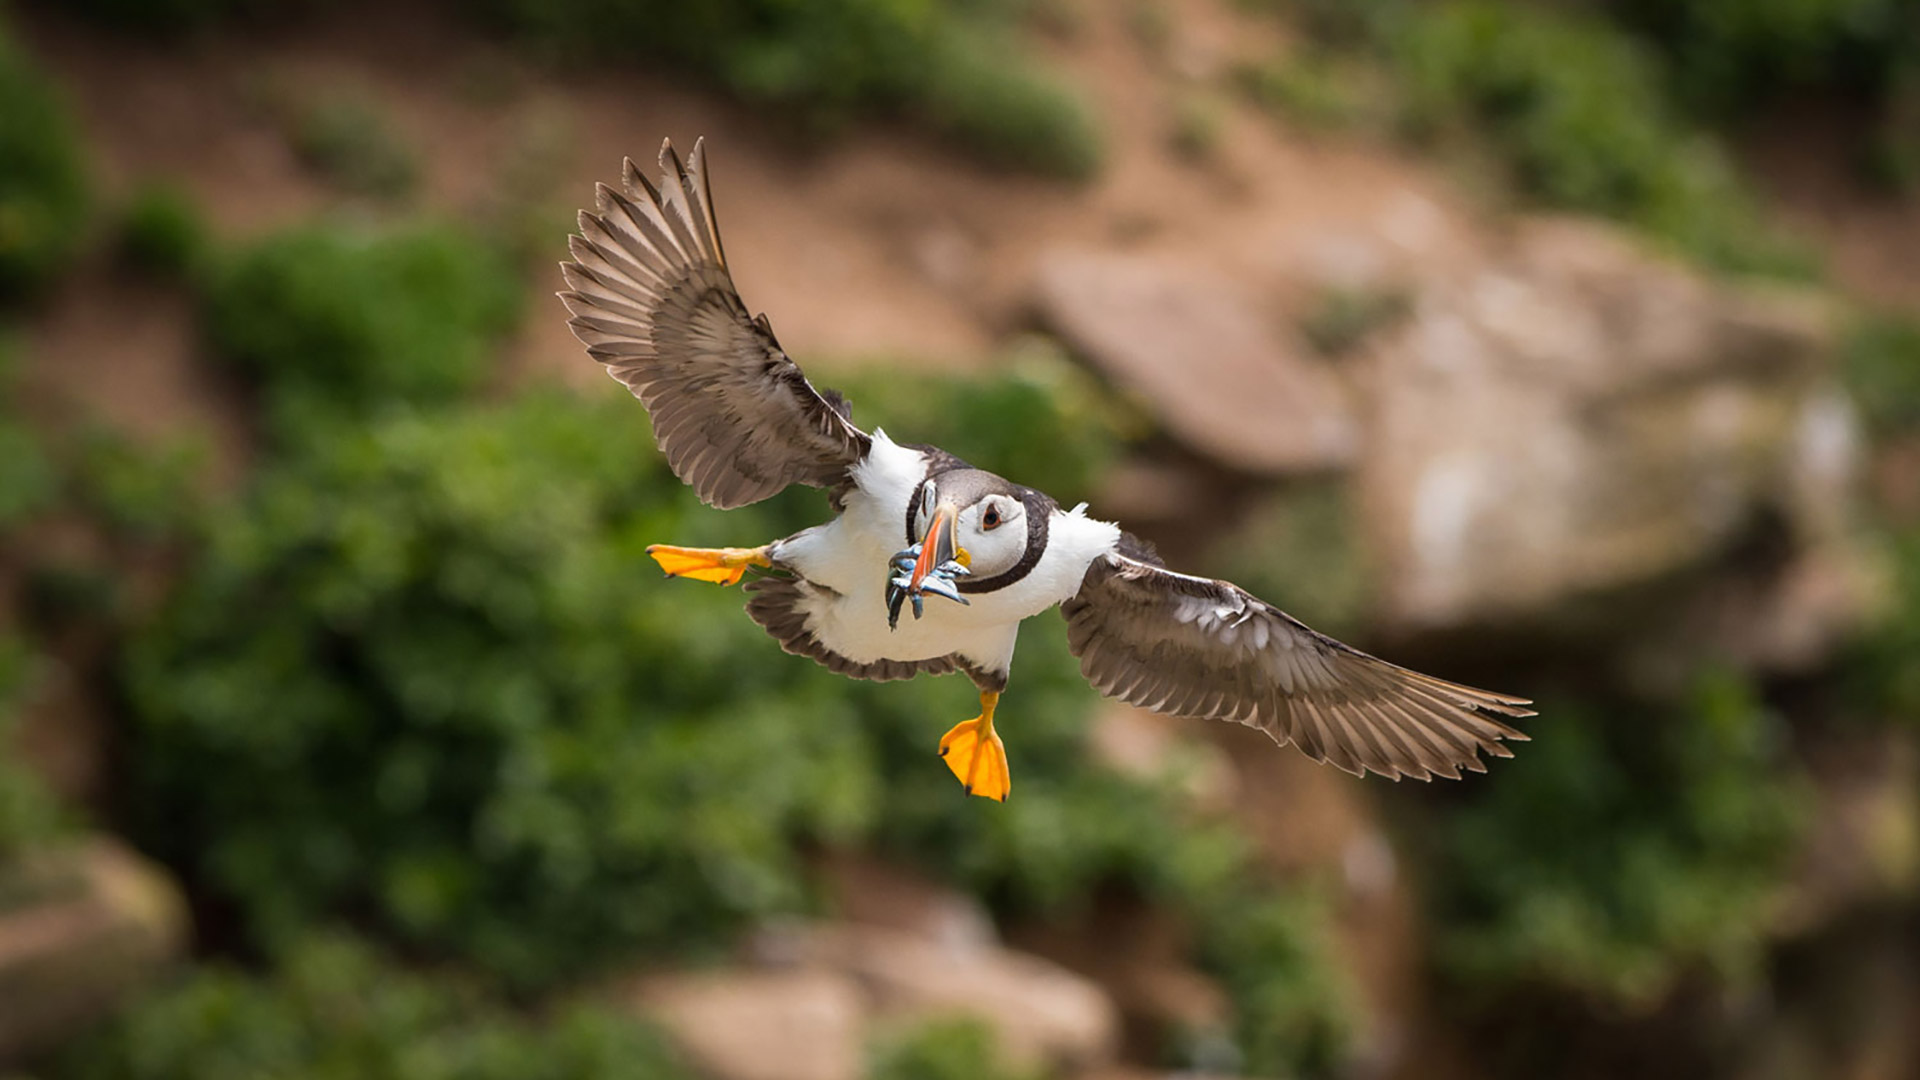 Puffin-in-Flight-George-Karbus-photographer